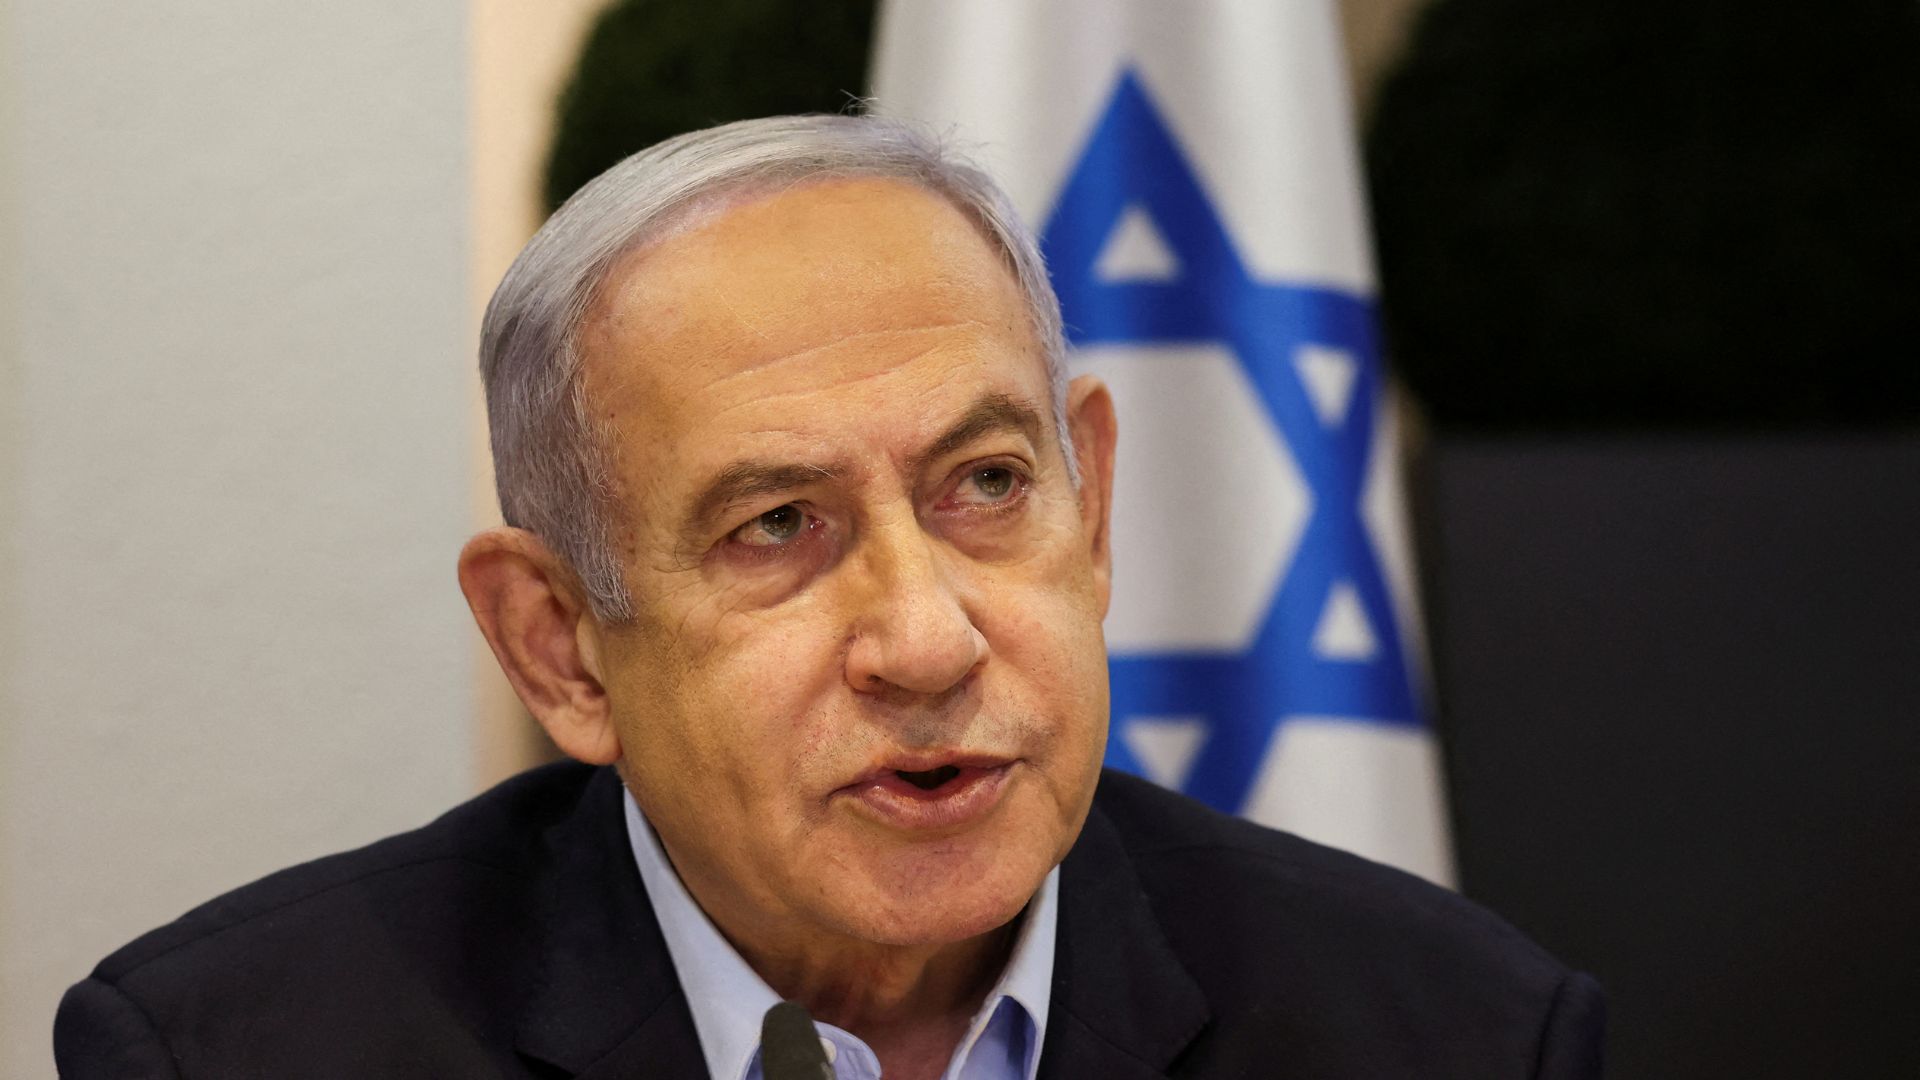 Israeli Prime Minister Benjamin Netanyahu said 'Whoever harms us, we will harm them' after threats from Iran. /Ronen Zvulun/Reuters